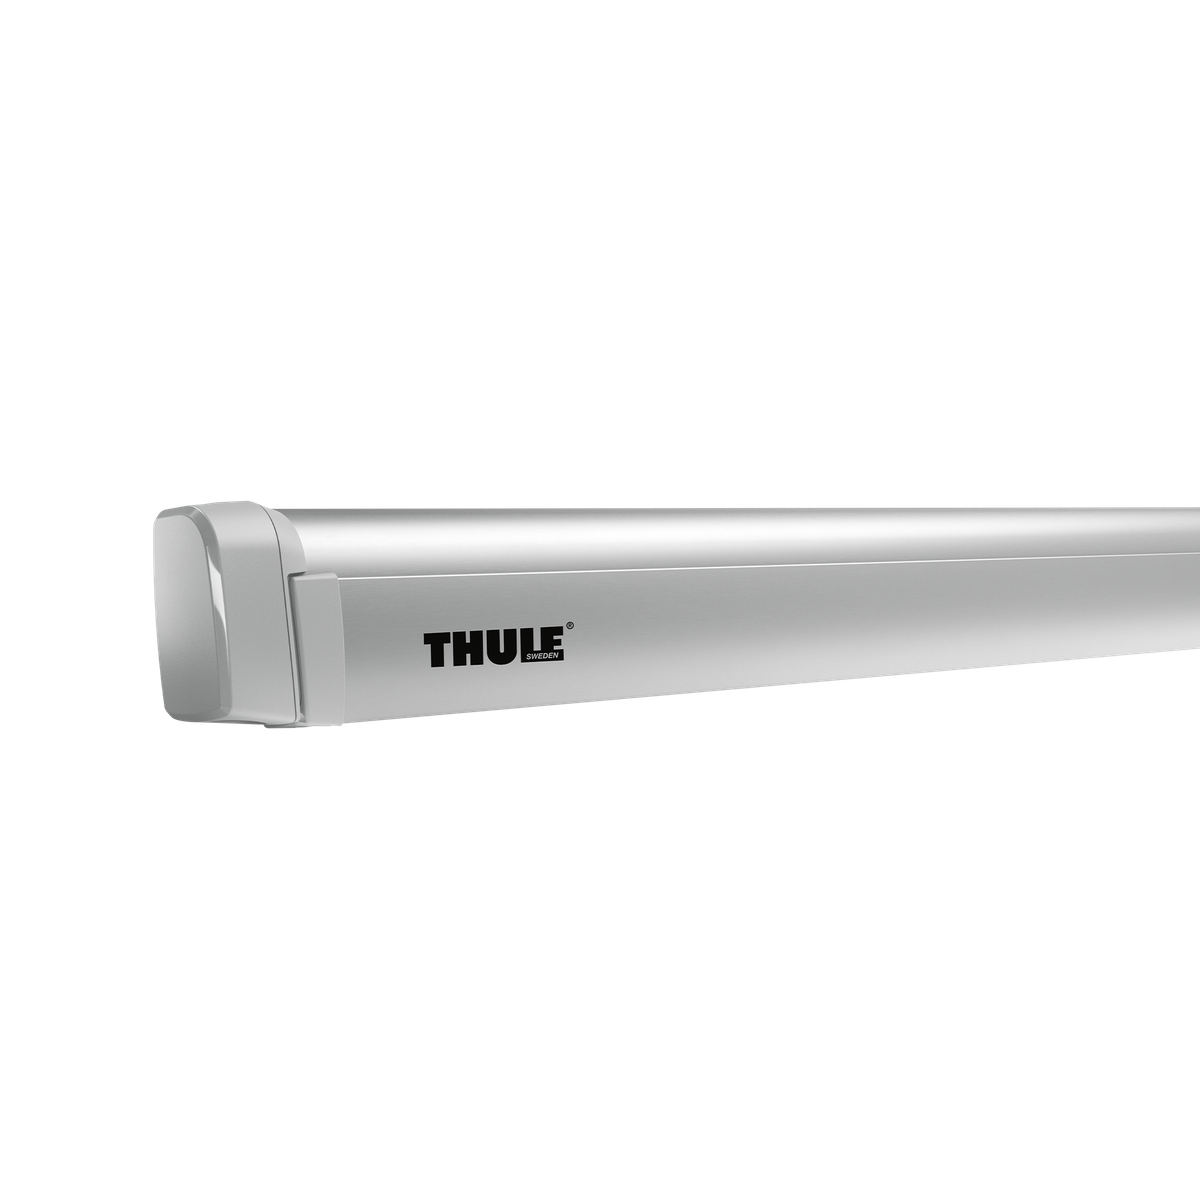 Thule 4200 wall awning 4.50x2.50m anodised gray